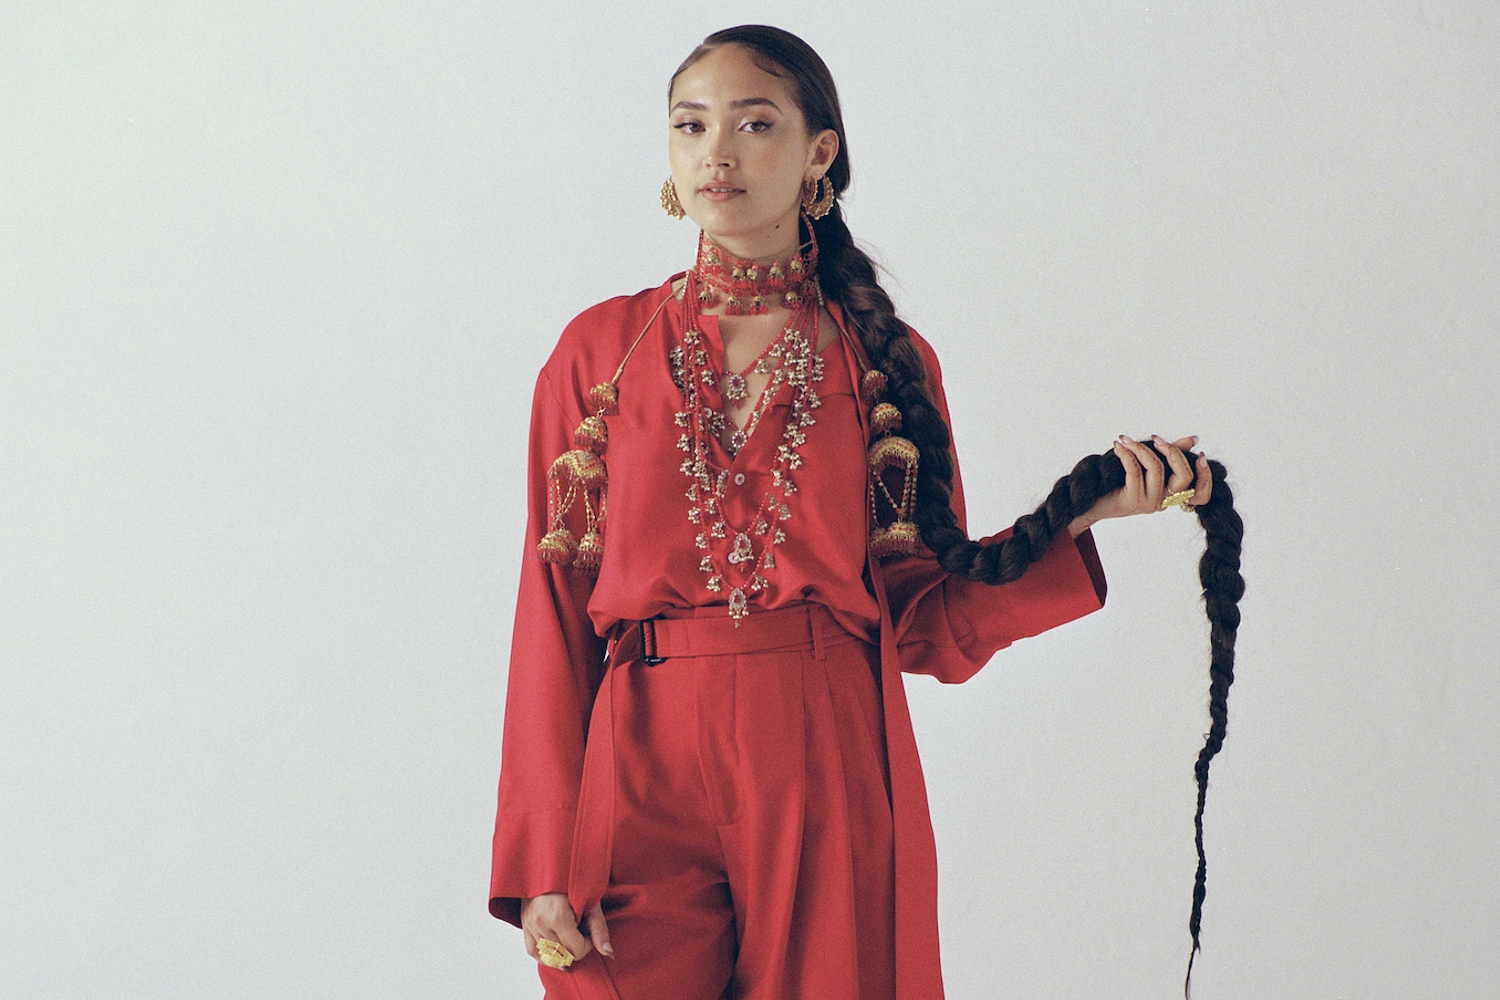 “I just wanted to make something I would be proud of” - Joy Crookes reflects on her debut ‘Skin’